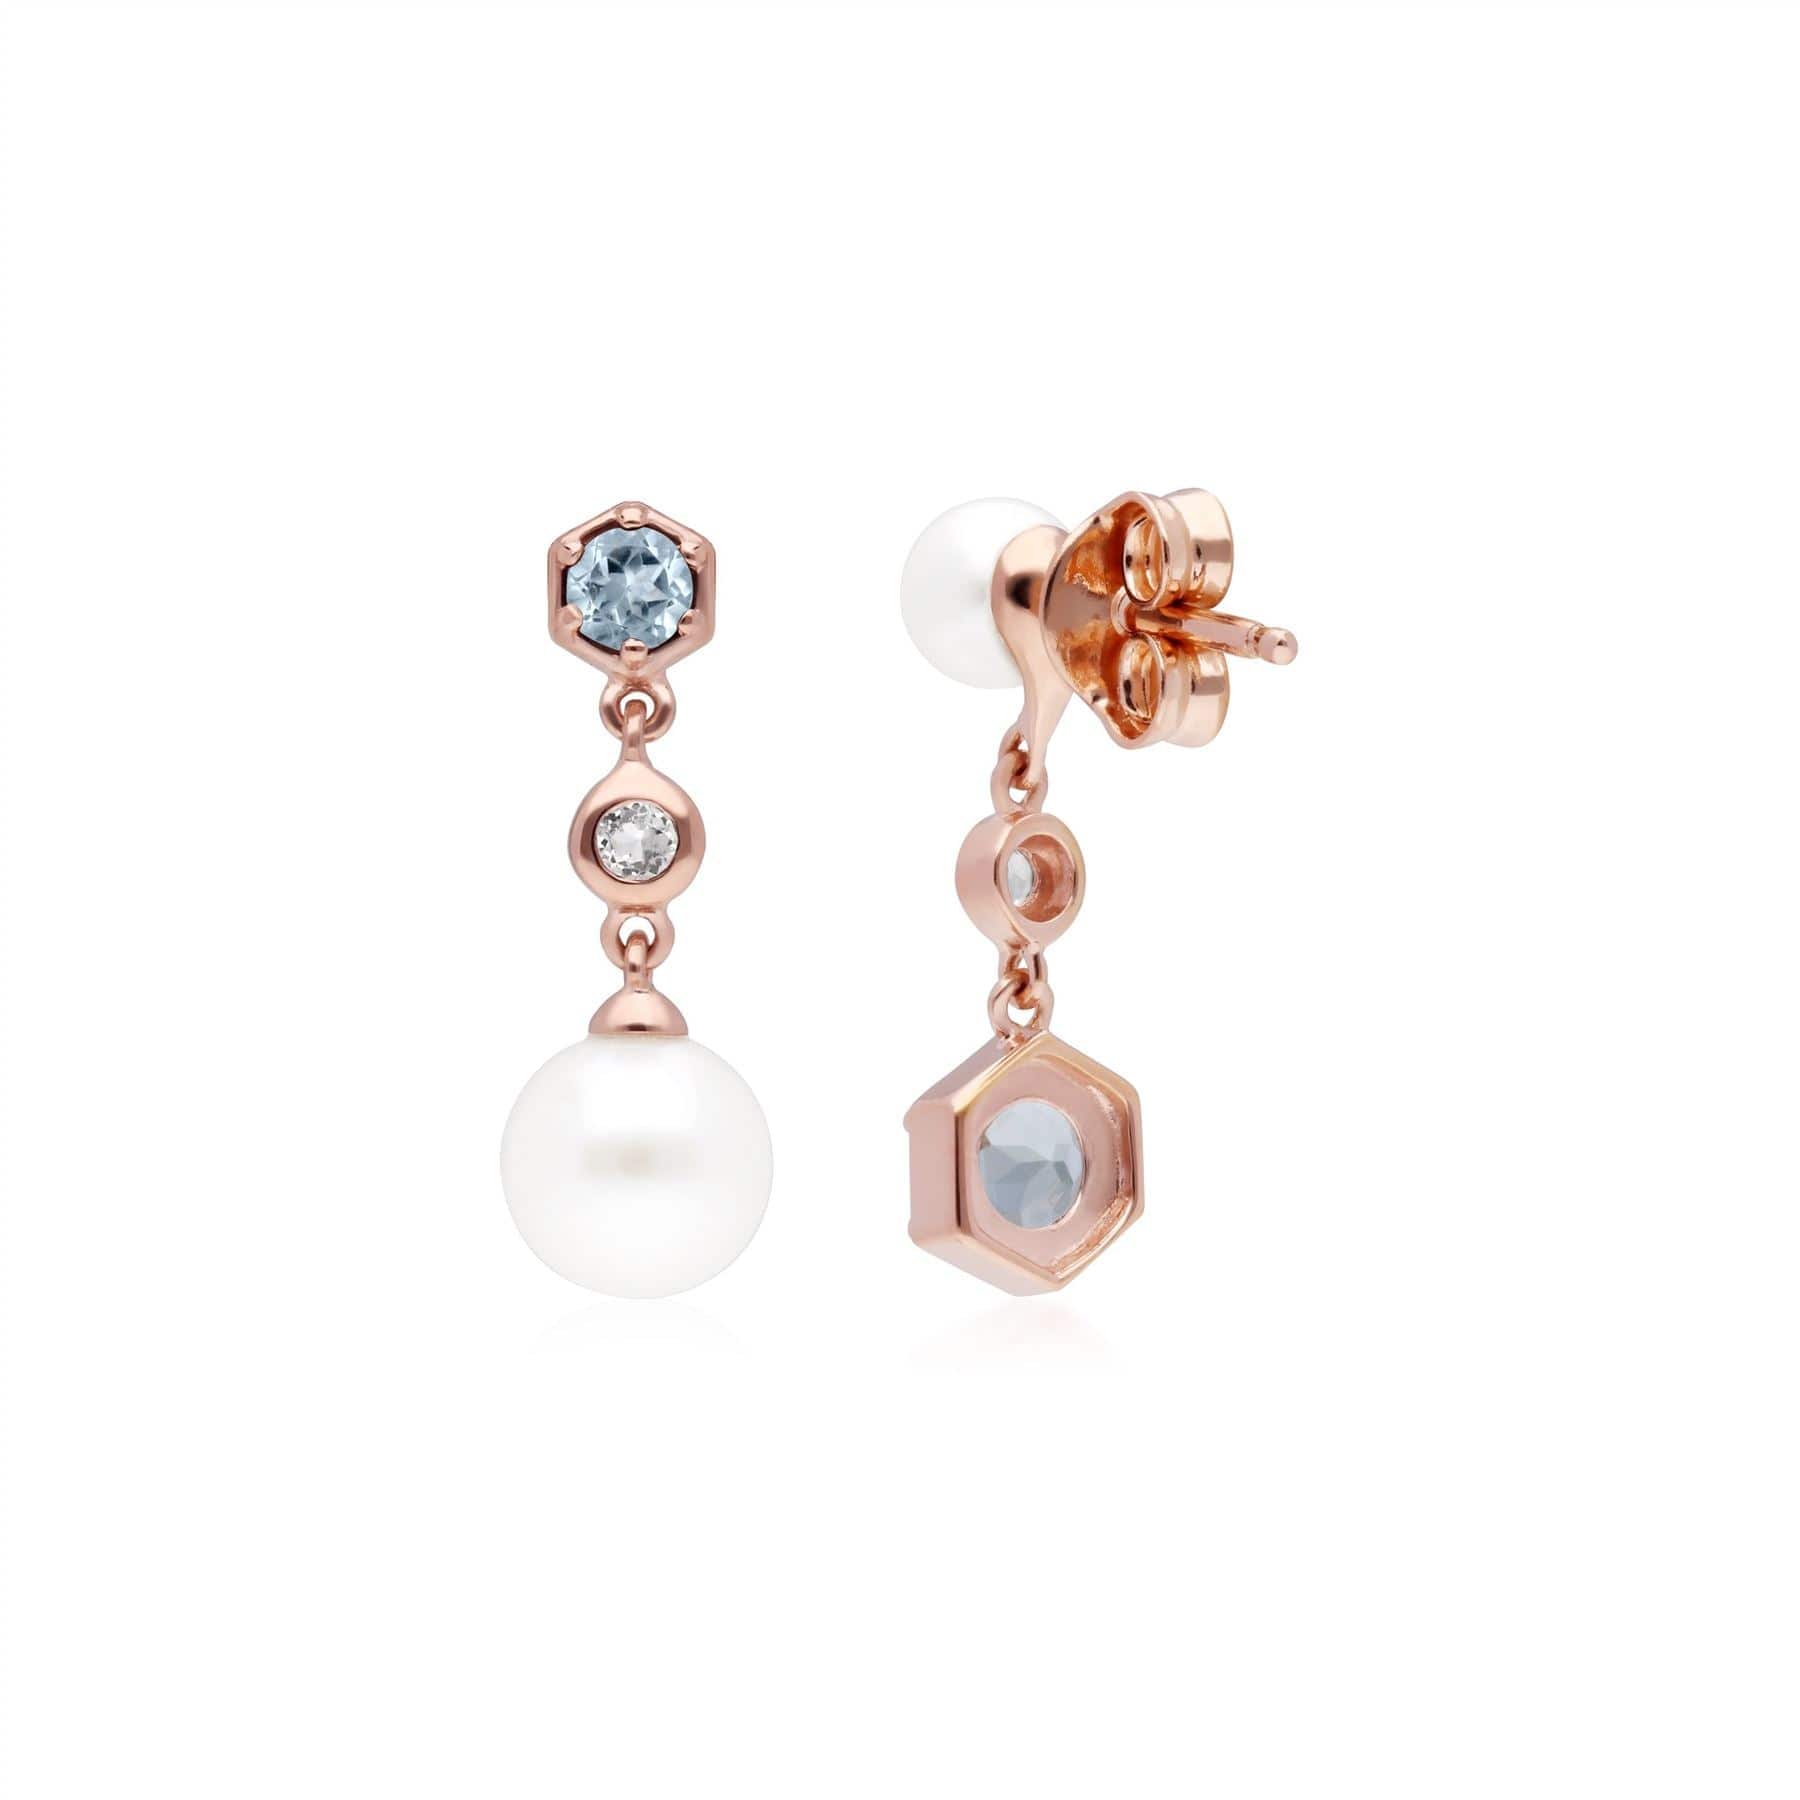 Modern Pearl, Aquamarine & Topaz Mismatched Drop Earrings in Rose Gold Plated Sterling Silver